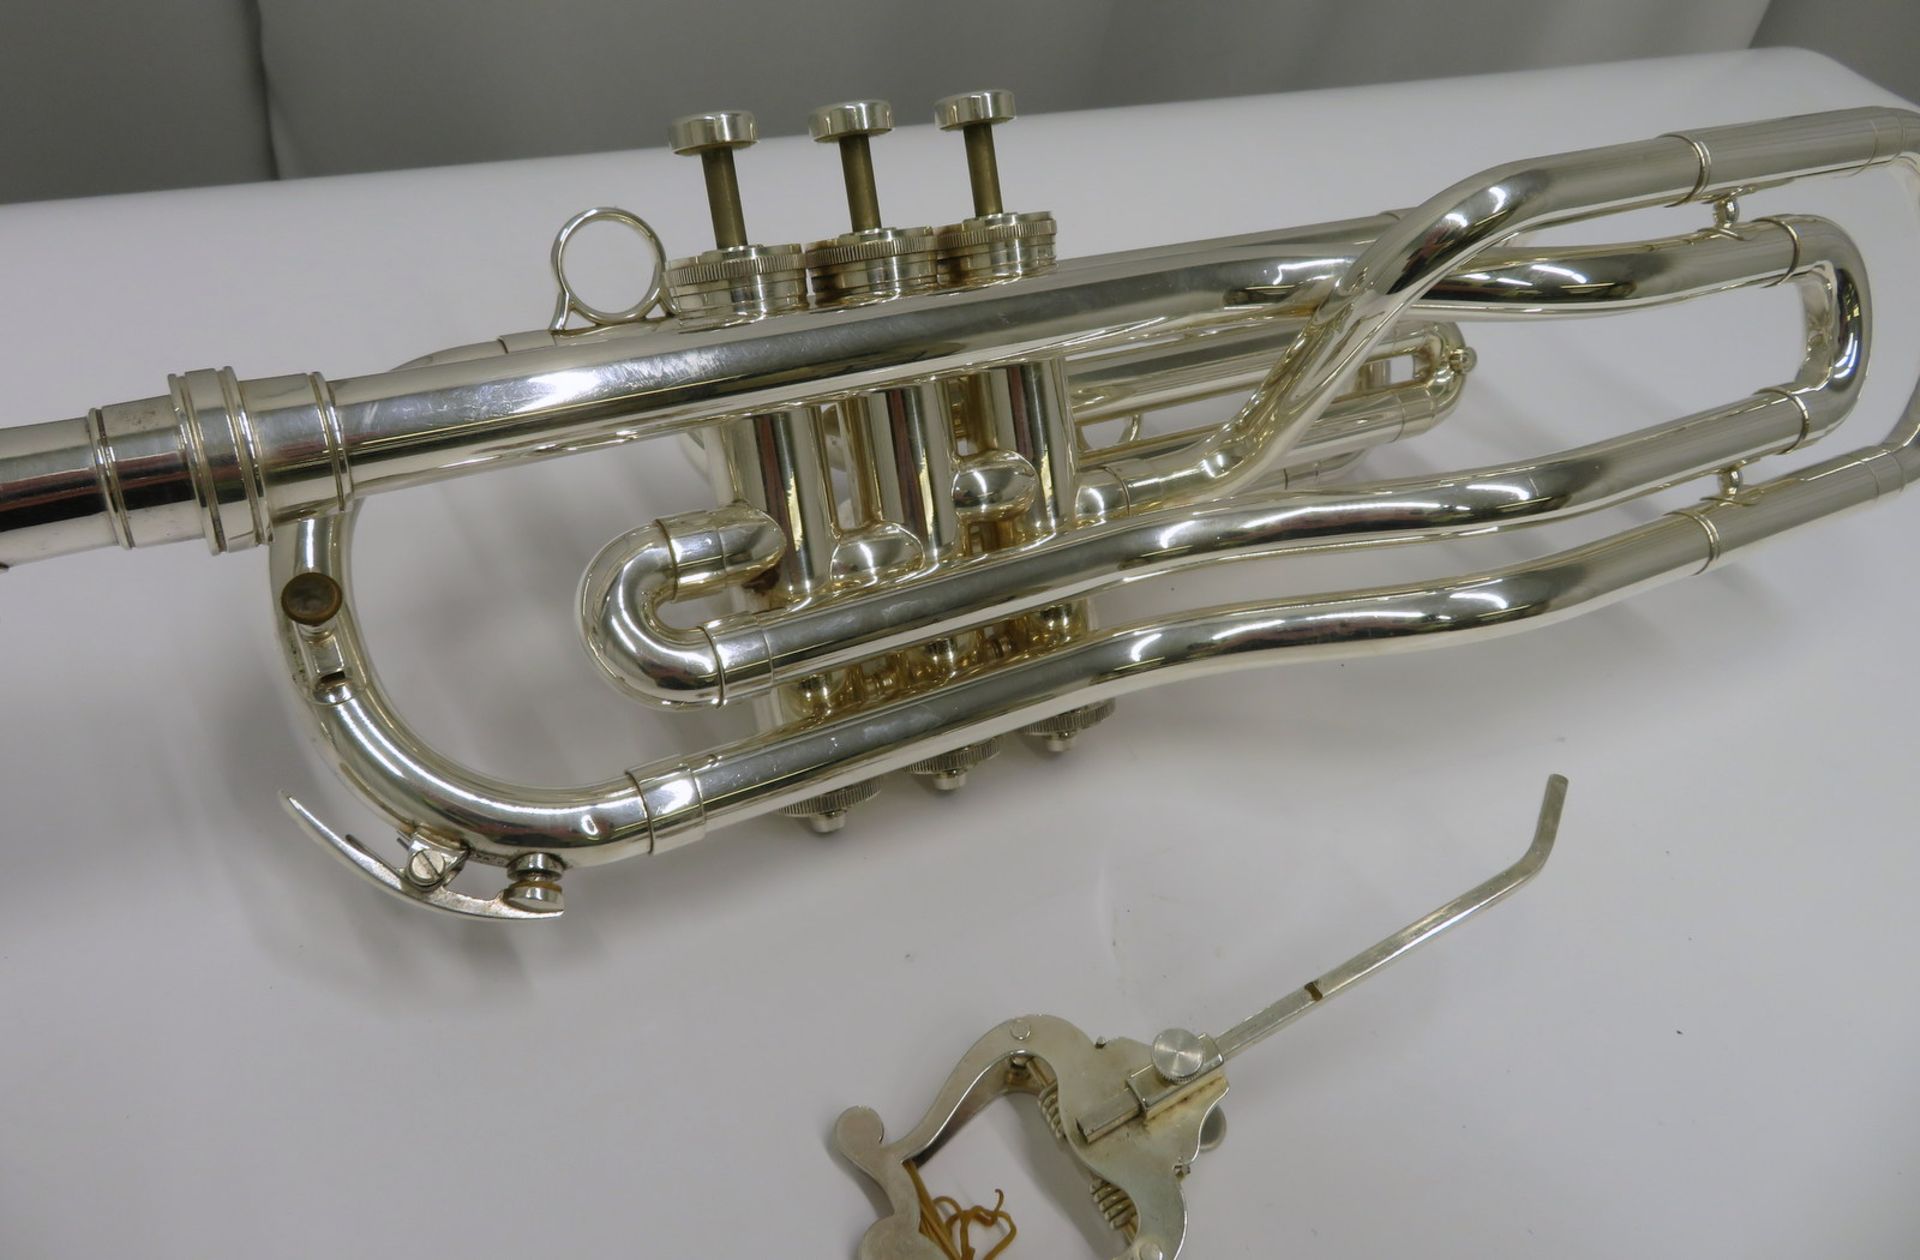 Besson International BE708 fanfare trumpet with case. Serial number: 887800. - Image 13 of 14